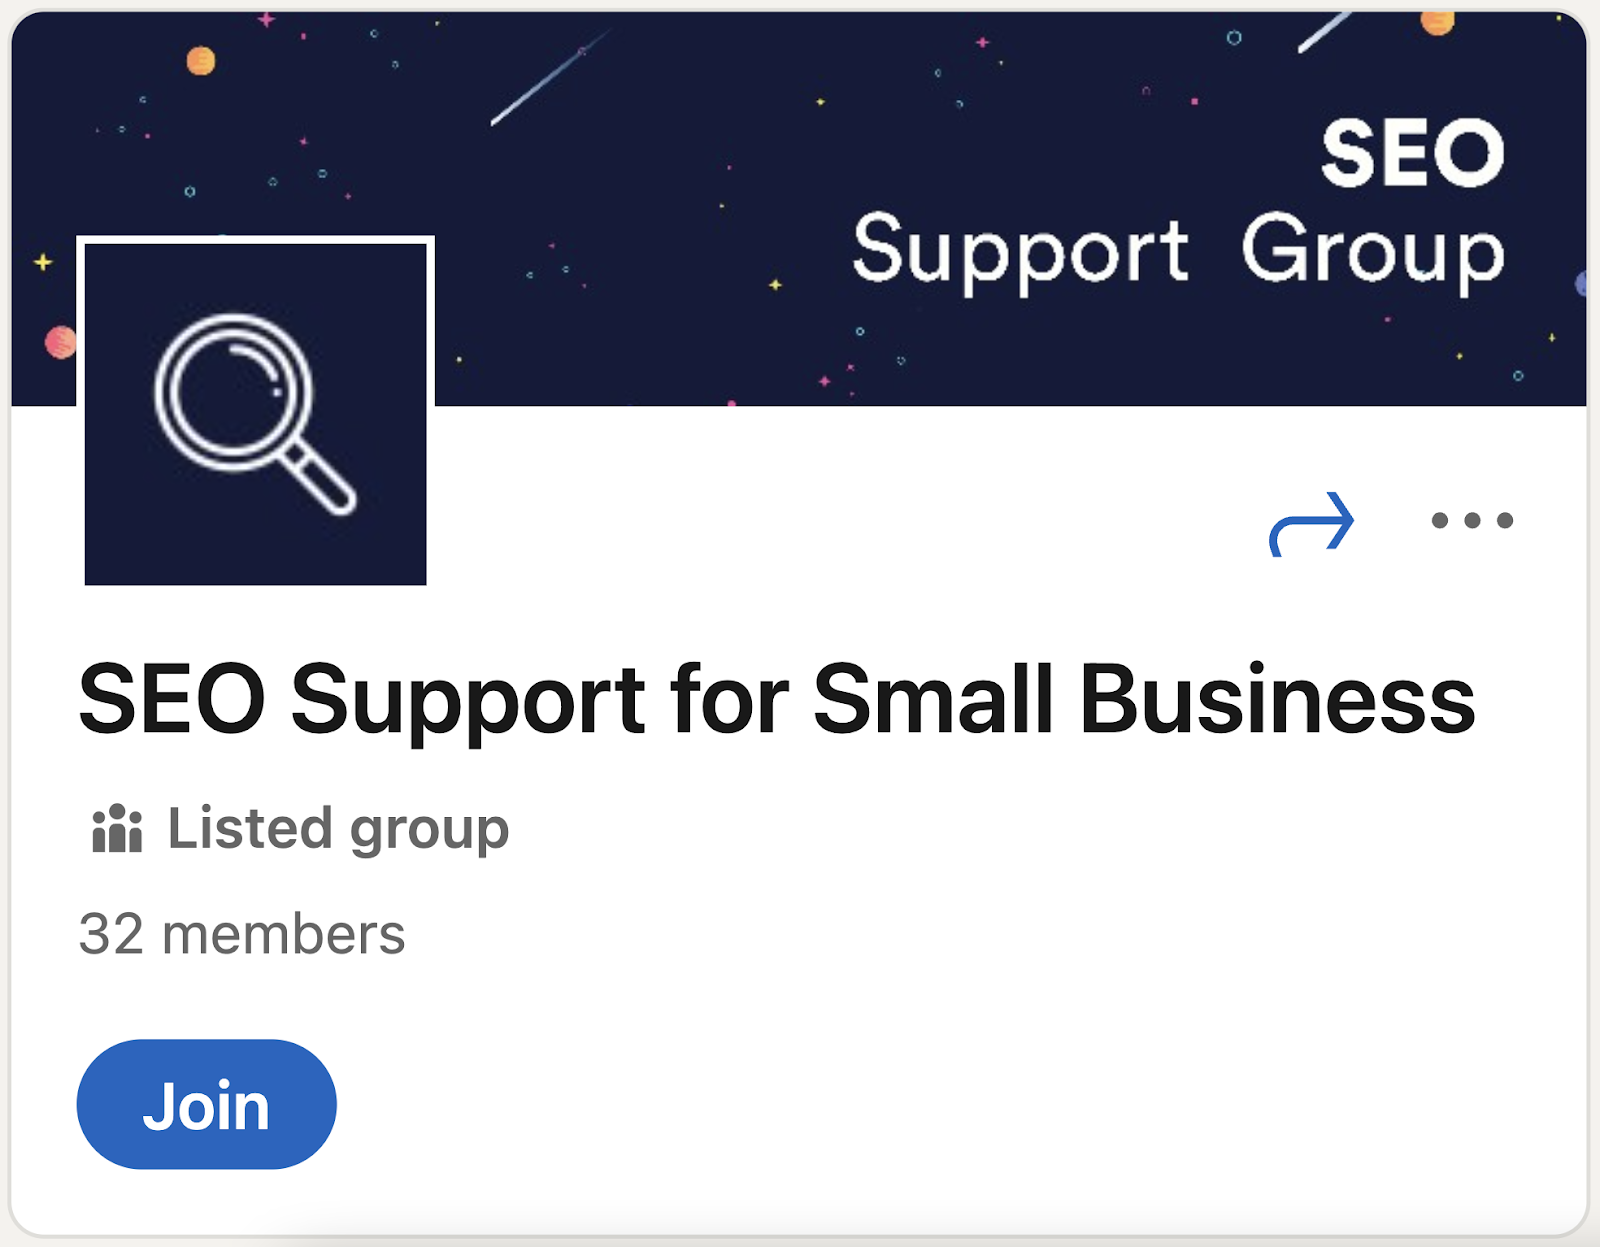 "SEO Support for Small Business" LinkedIn Group